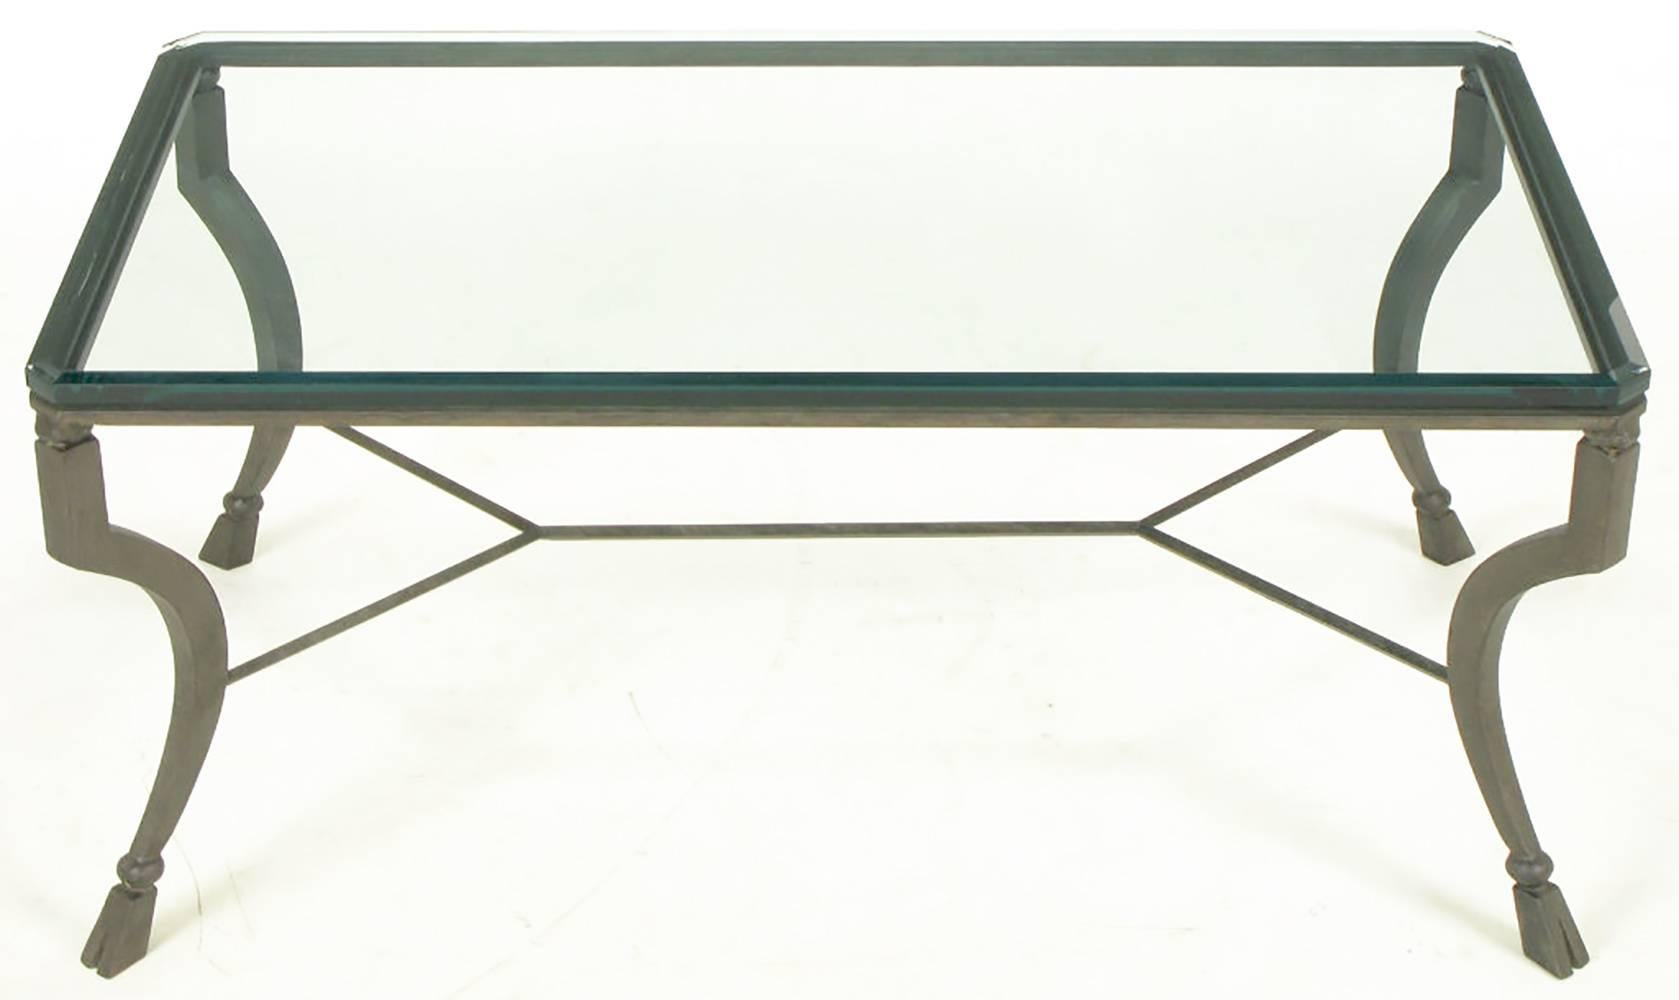 Antiqued metal hand-wrought and welded iron coffee table with canted legs and hoofed feet with iron ball spacers. Double Y stretcher support and beveled glass top with canted corners.